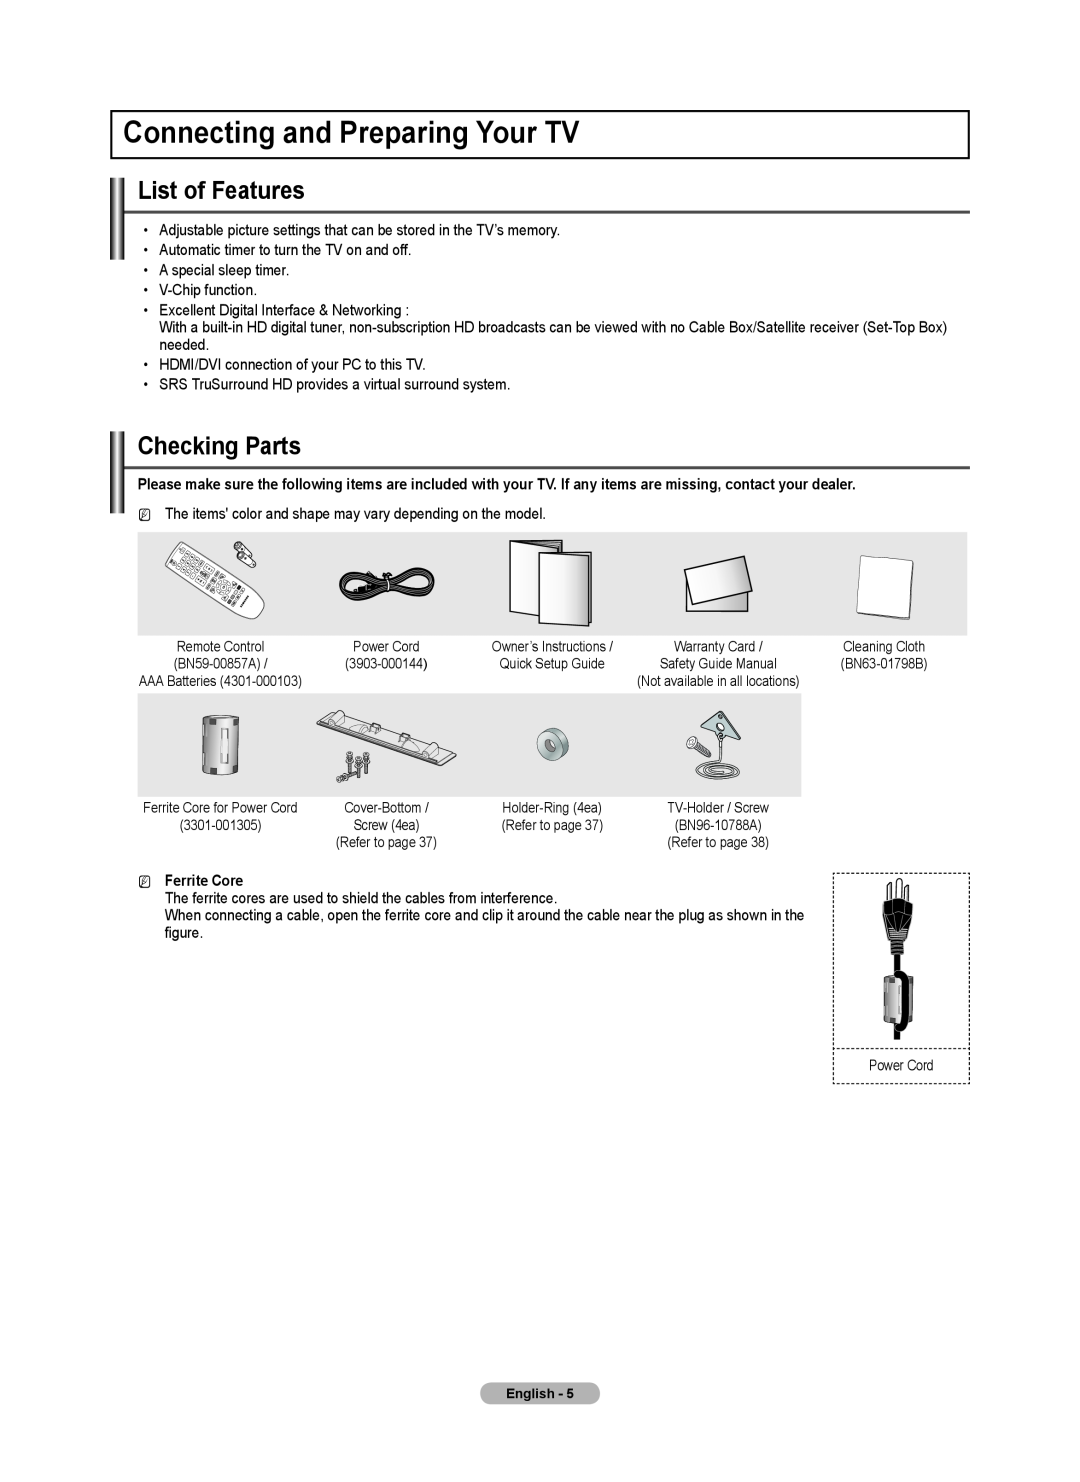 Samsung BN68-02426A-00 user manual Connecting and Preparing Your TV, List of Features, Checking Parts, NN Ferrite Core 